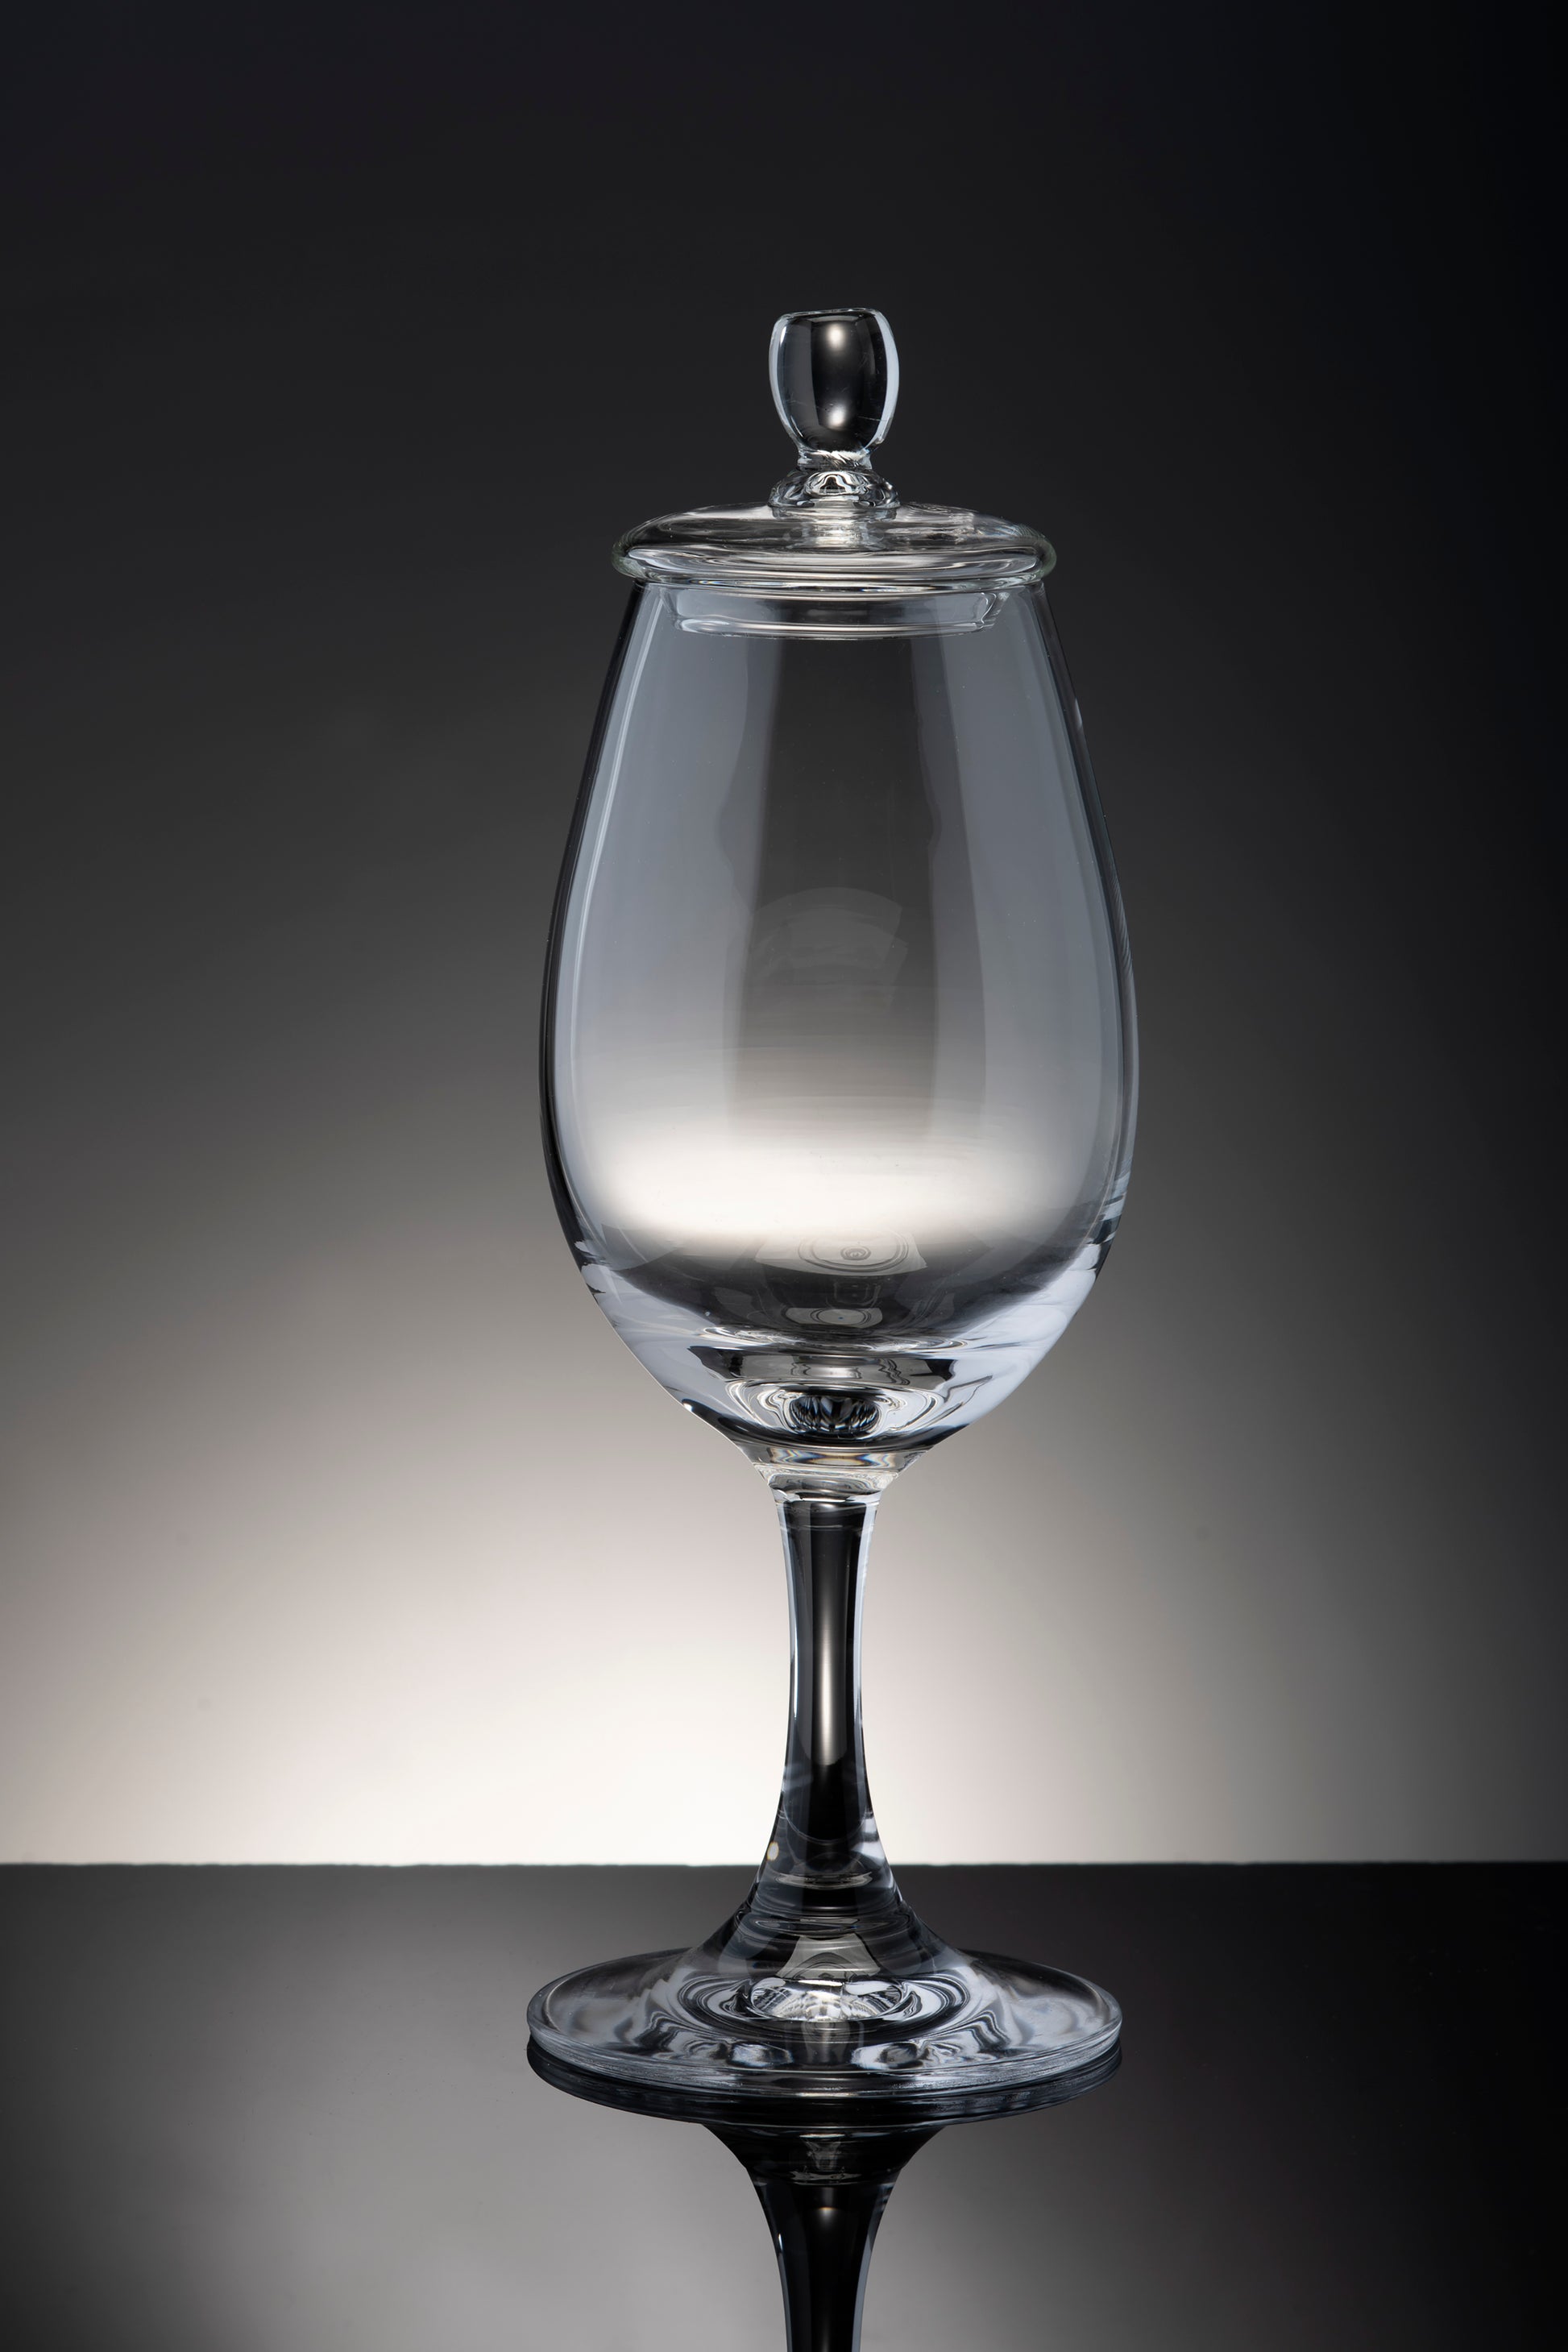 This tasting lid is designed specifically for the Copita glass.